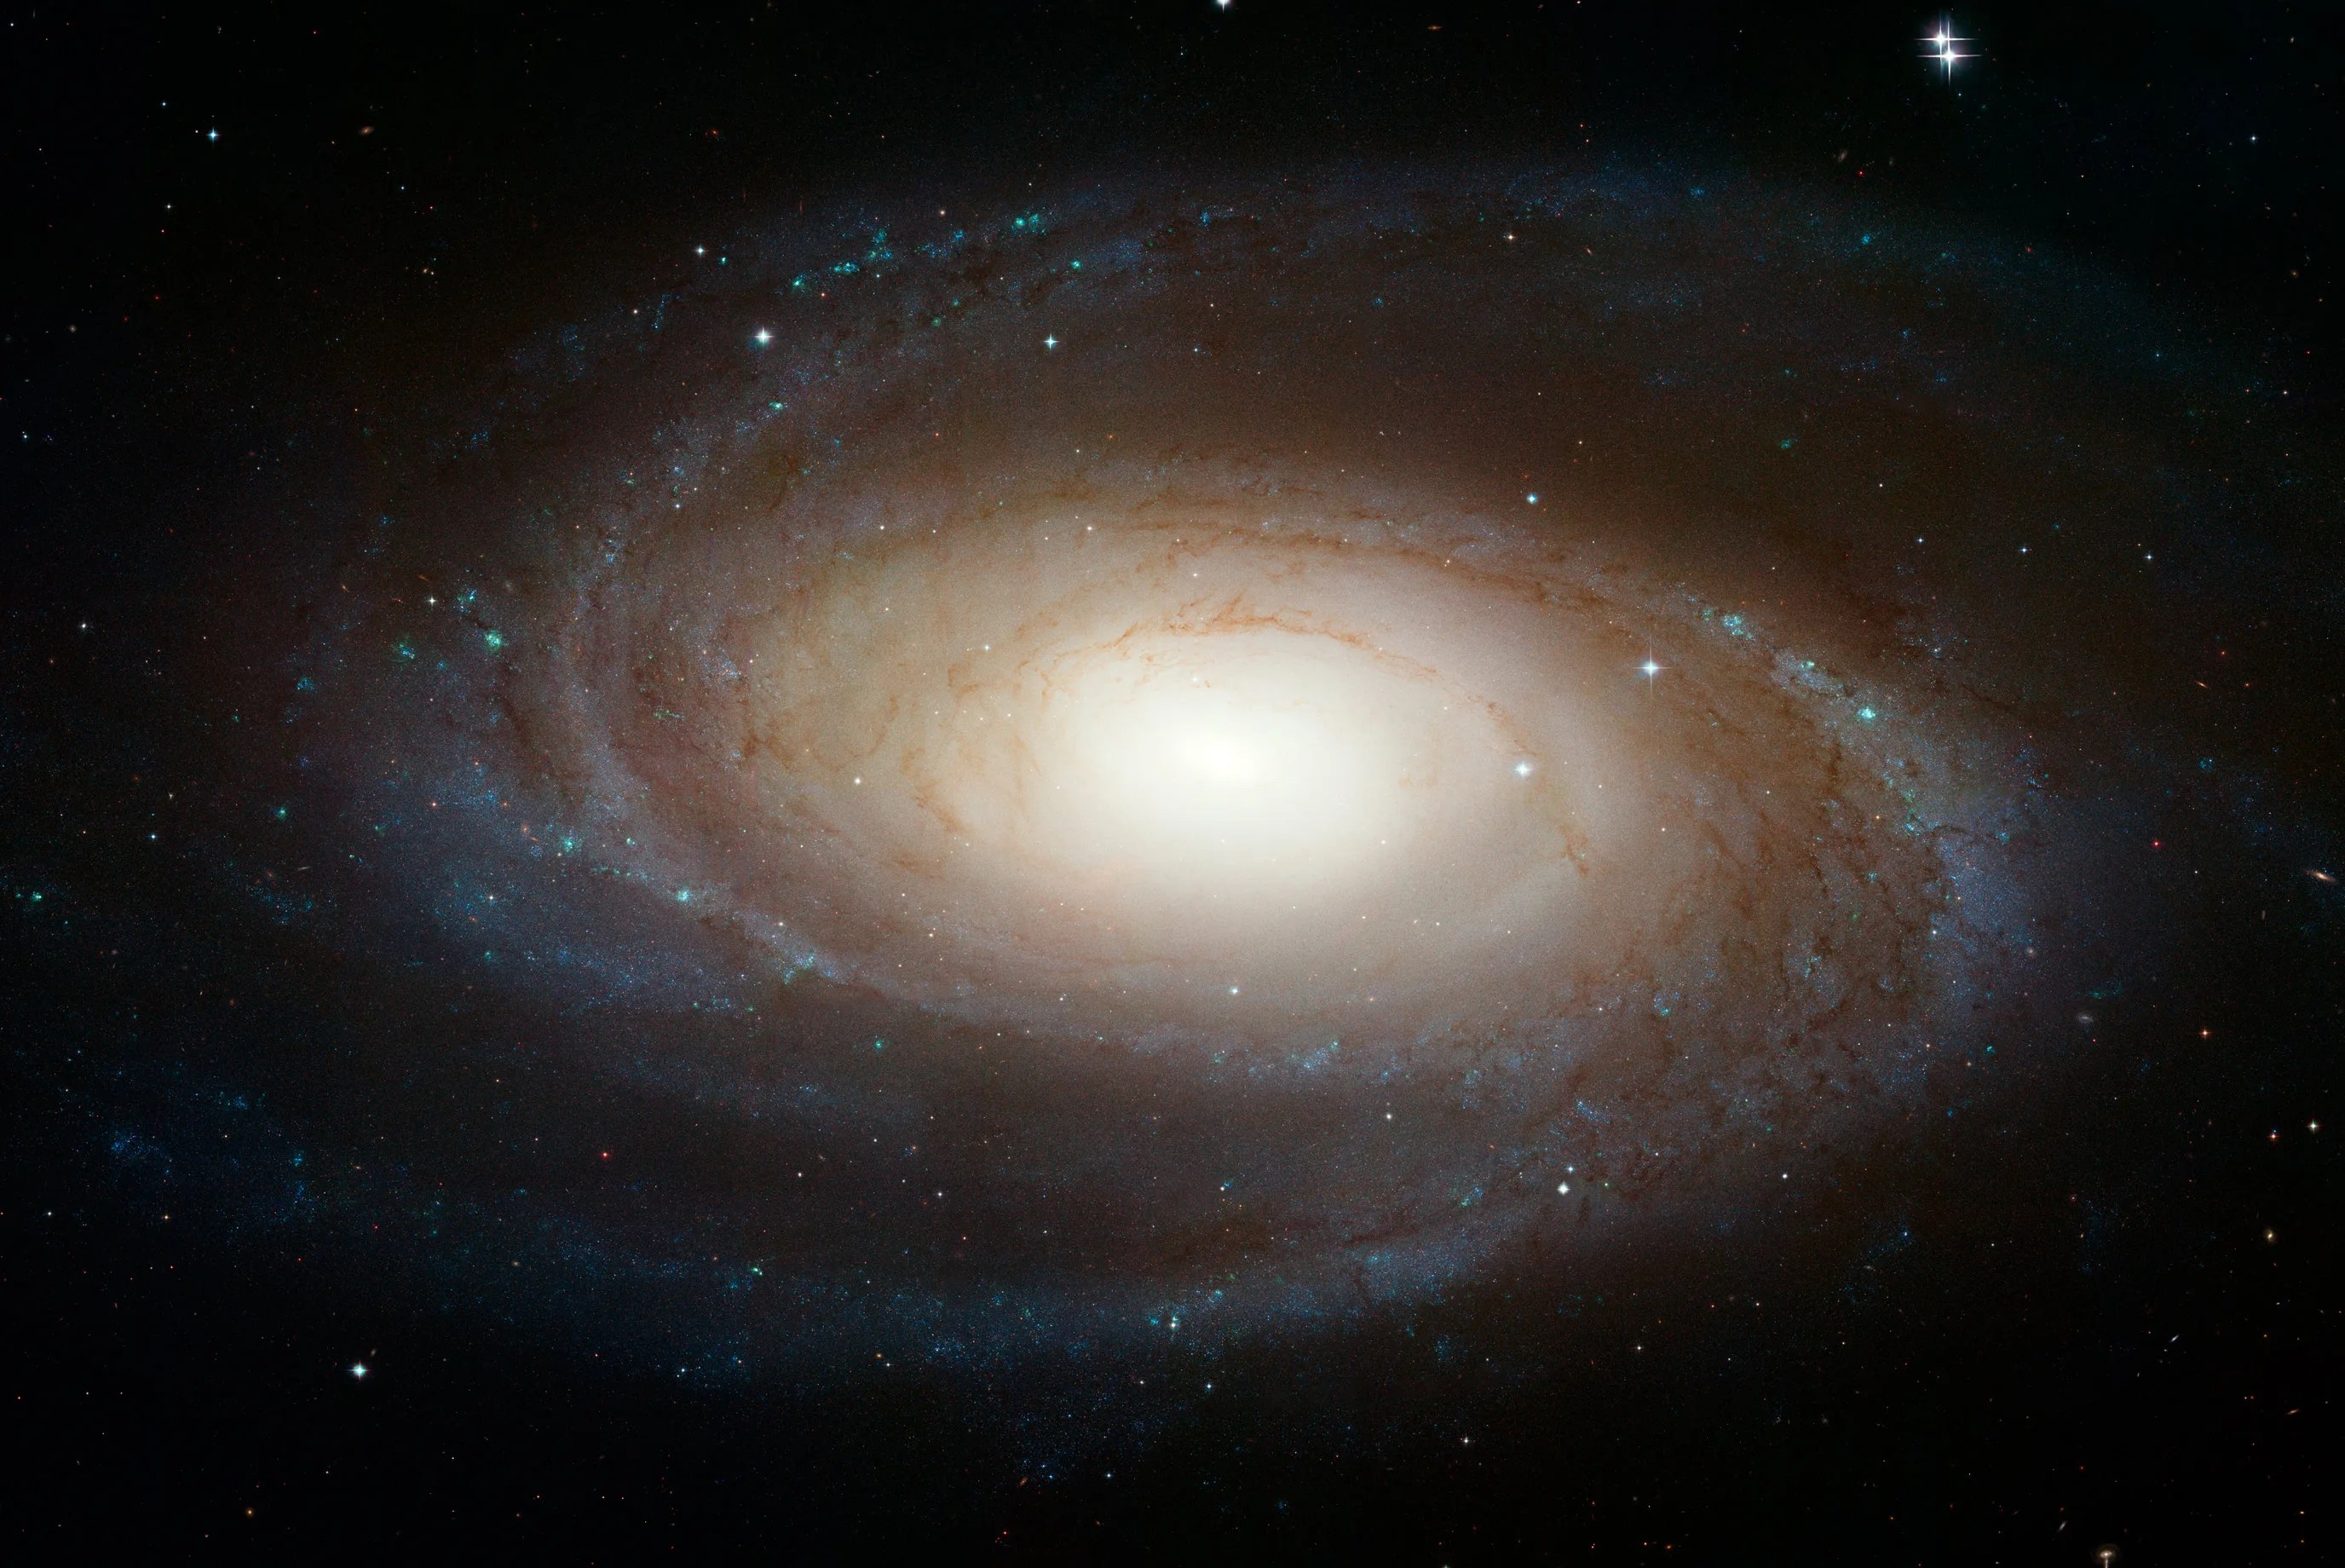 A bright spiral galaxy with a large, yellow core, with small spiral arms surrounding it.